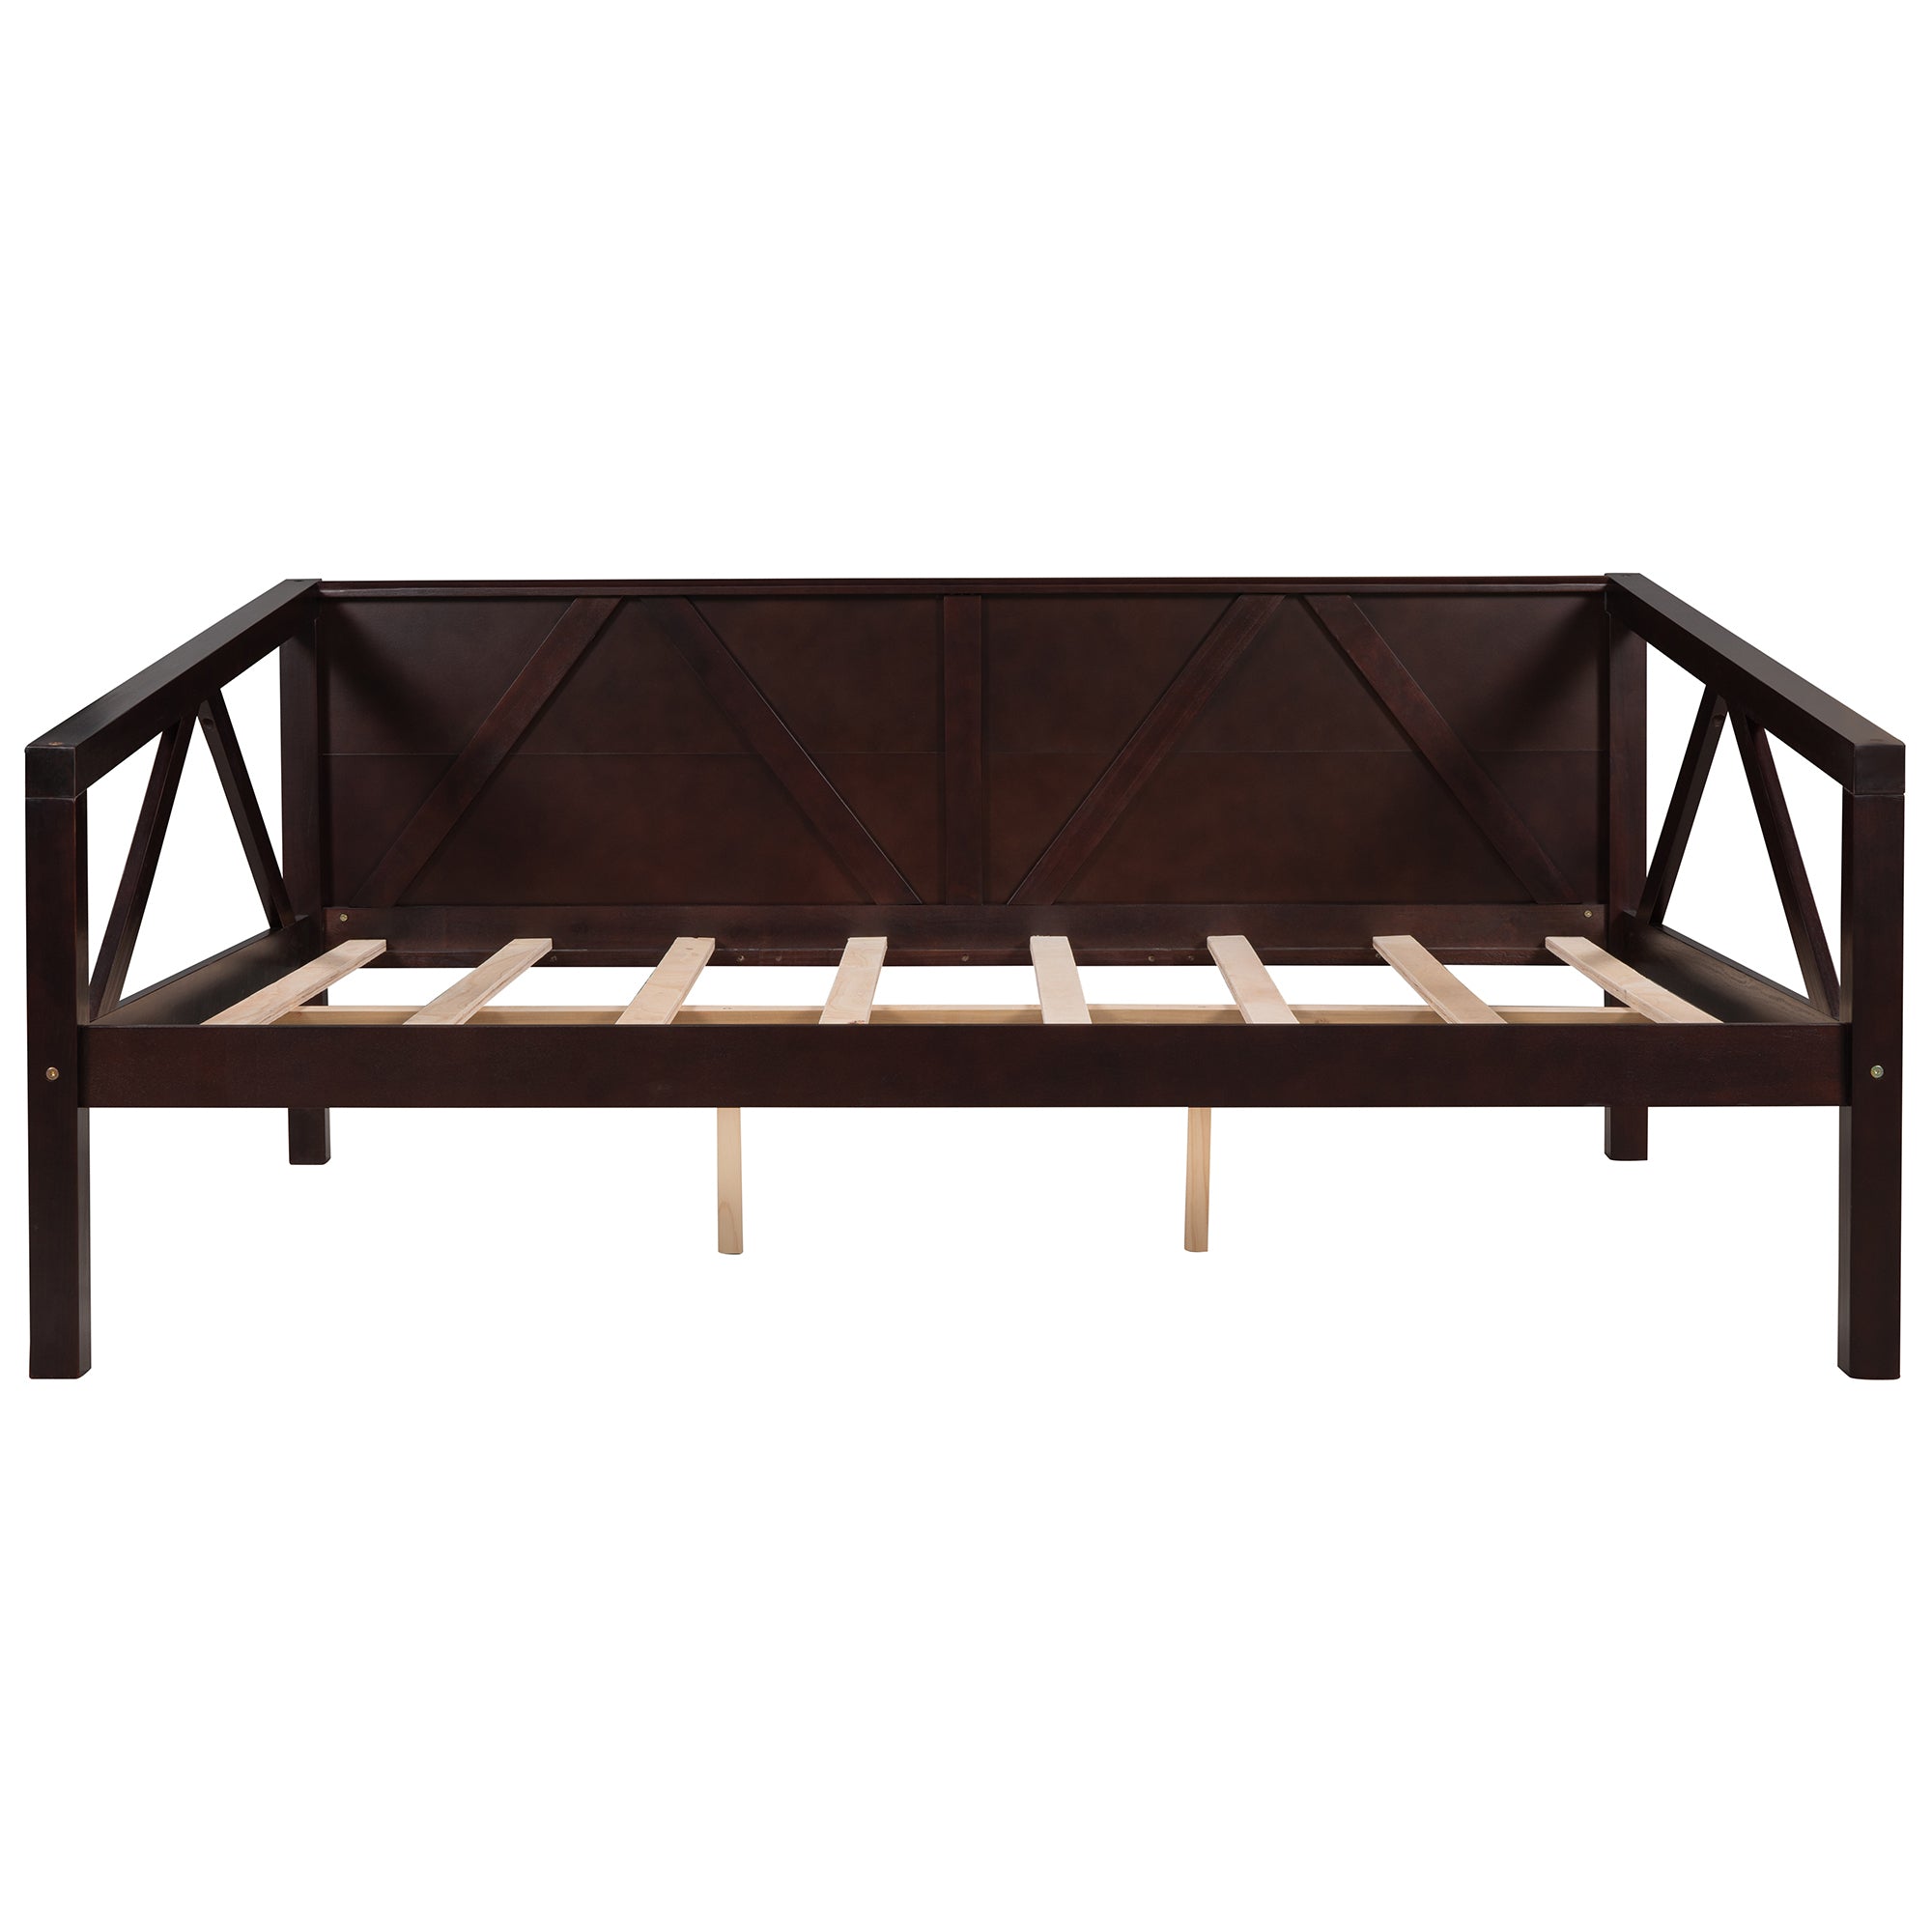 Full size Daybed (Espresso)